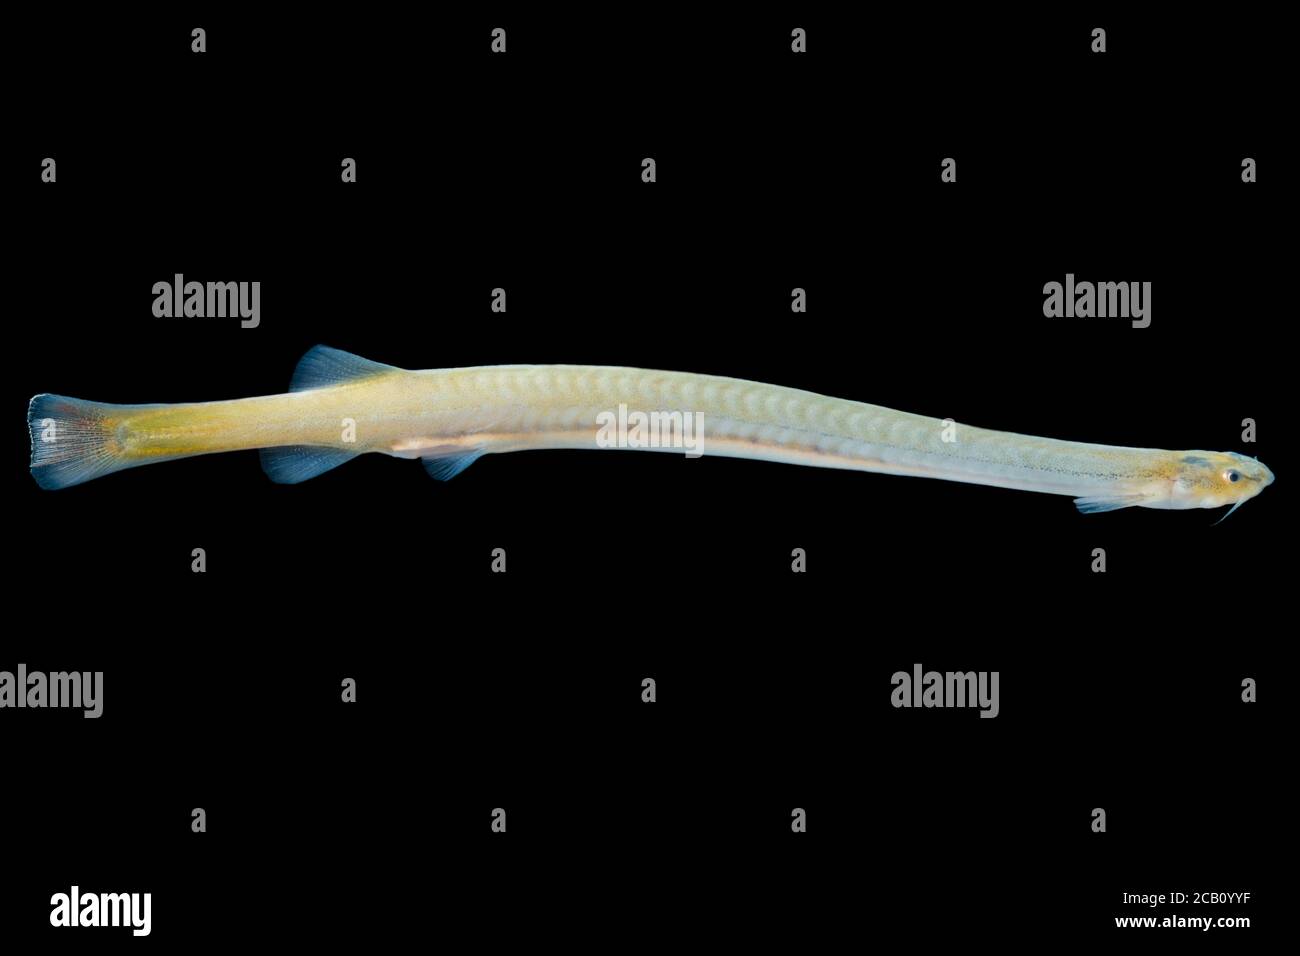 Candiru (Vandellia cirrhosa), also known as cañero, toothpick fish, or vampire fish, is a species of parasitic freshwater catfish in the family Tricho Stock Photo